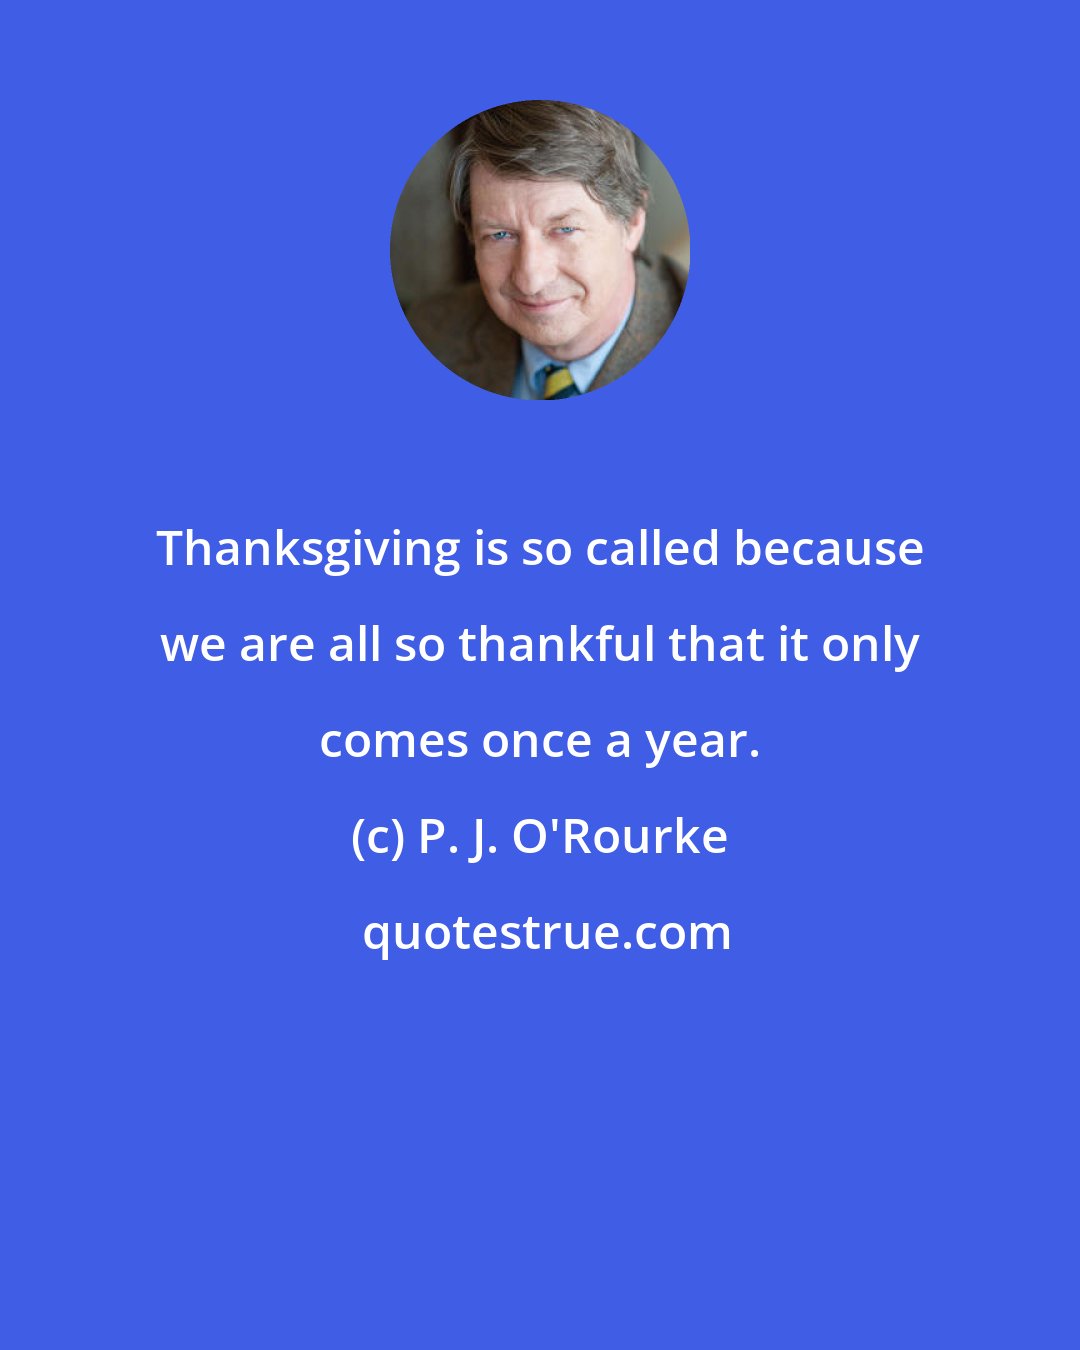 P. J. O'Rourke: Thanksgiving is so called because we are all so thankful that it only comes once a year.